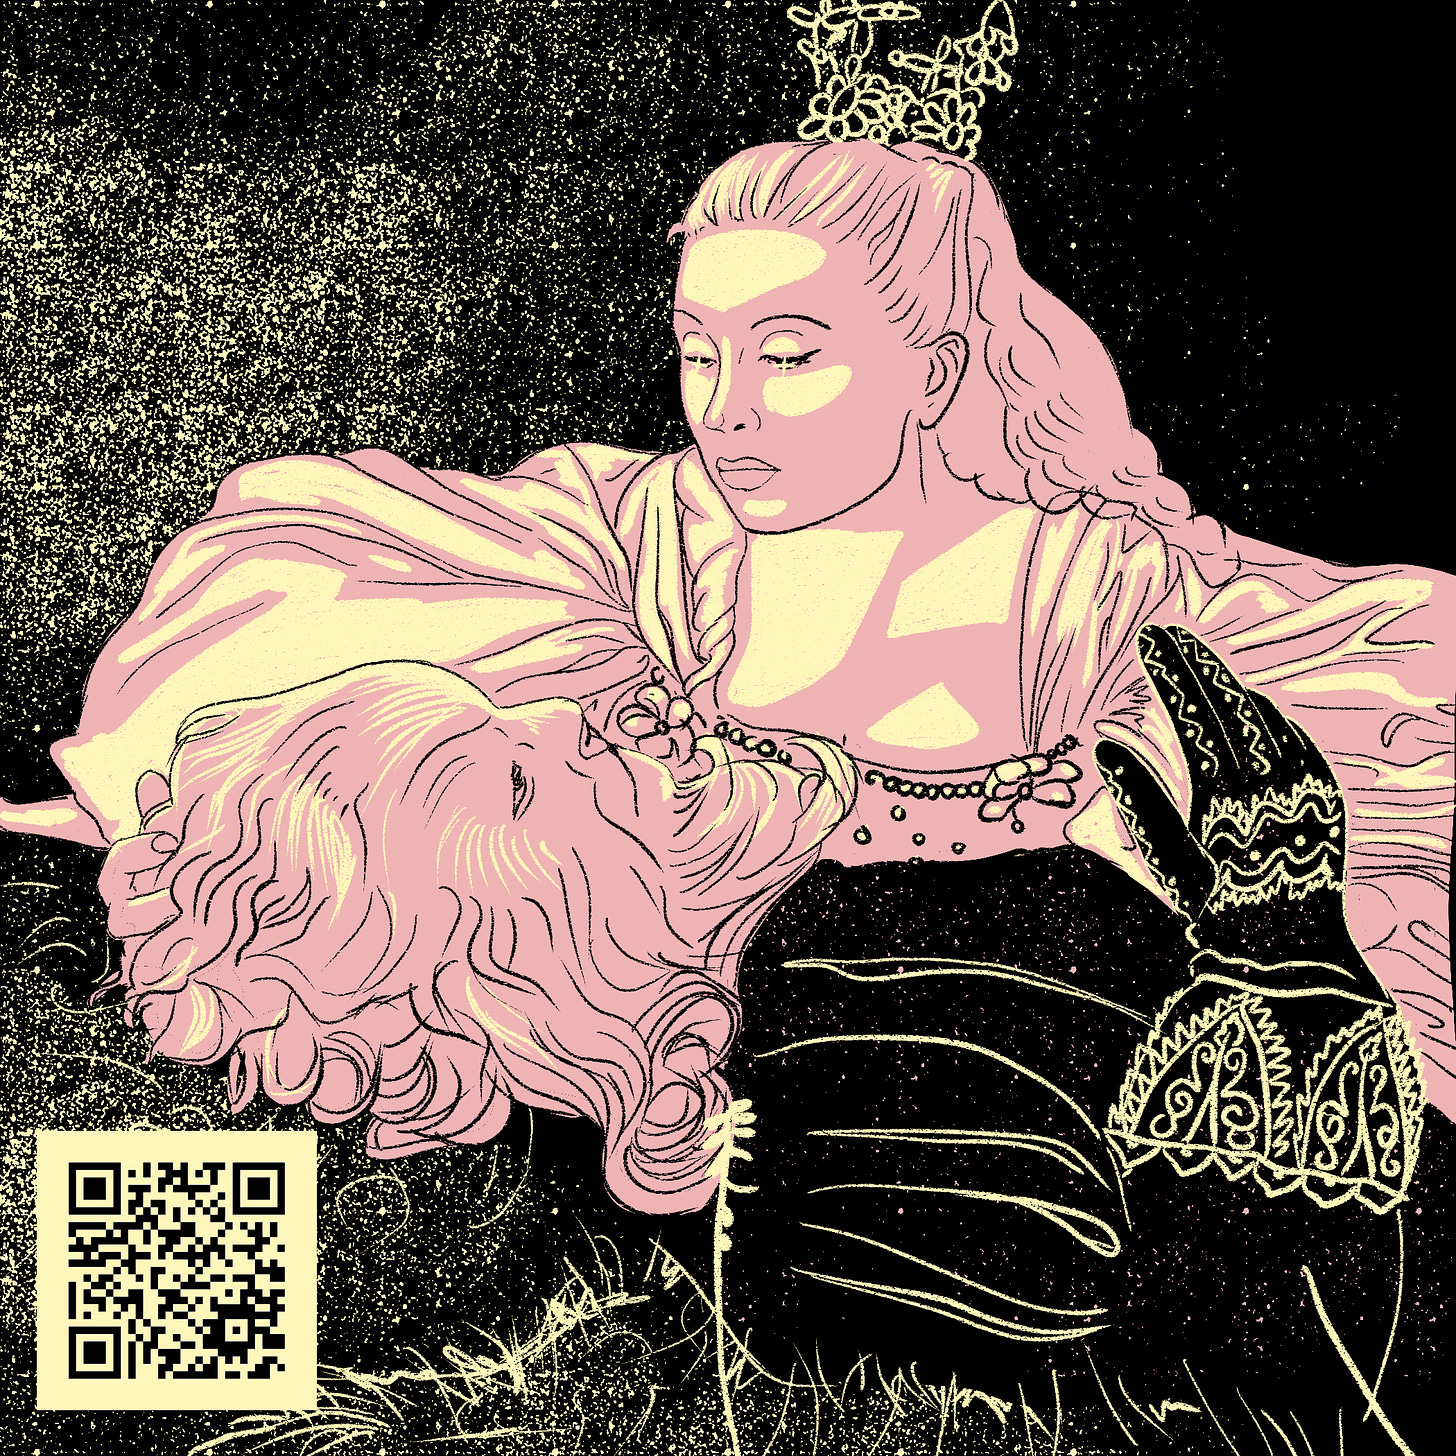 Image Description: A drawing of a still from the 1945 film La Belle et la Bête. Belle is looking over the dying Beast.